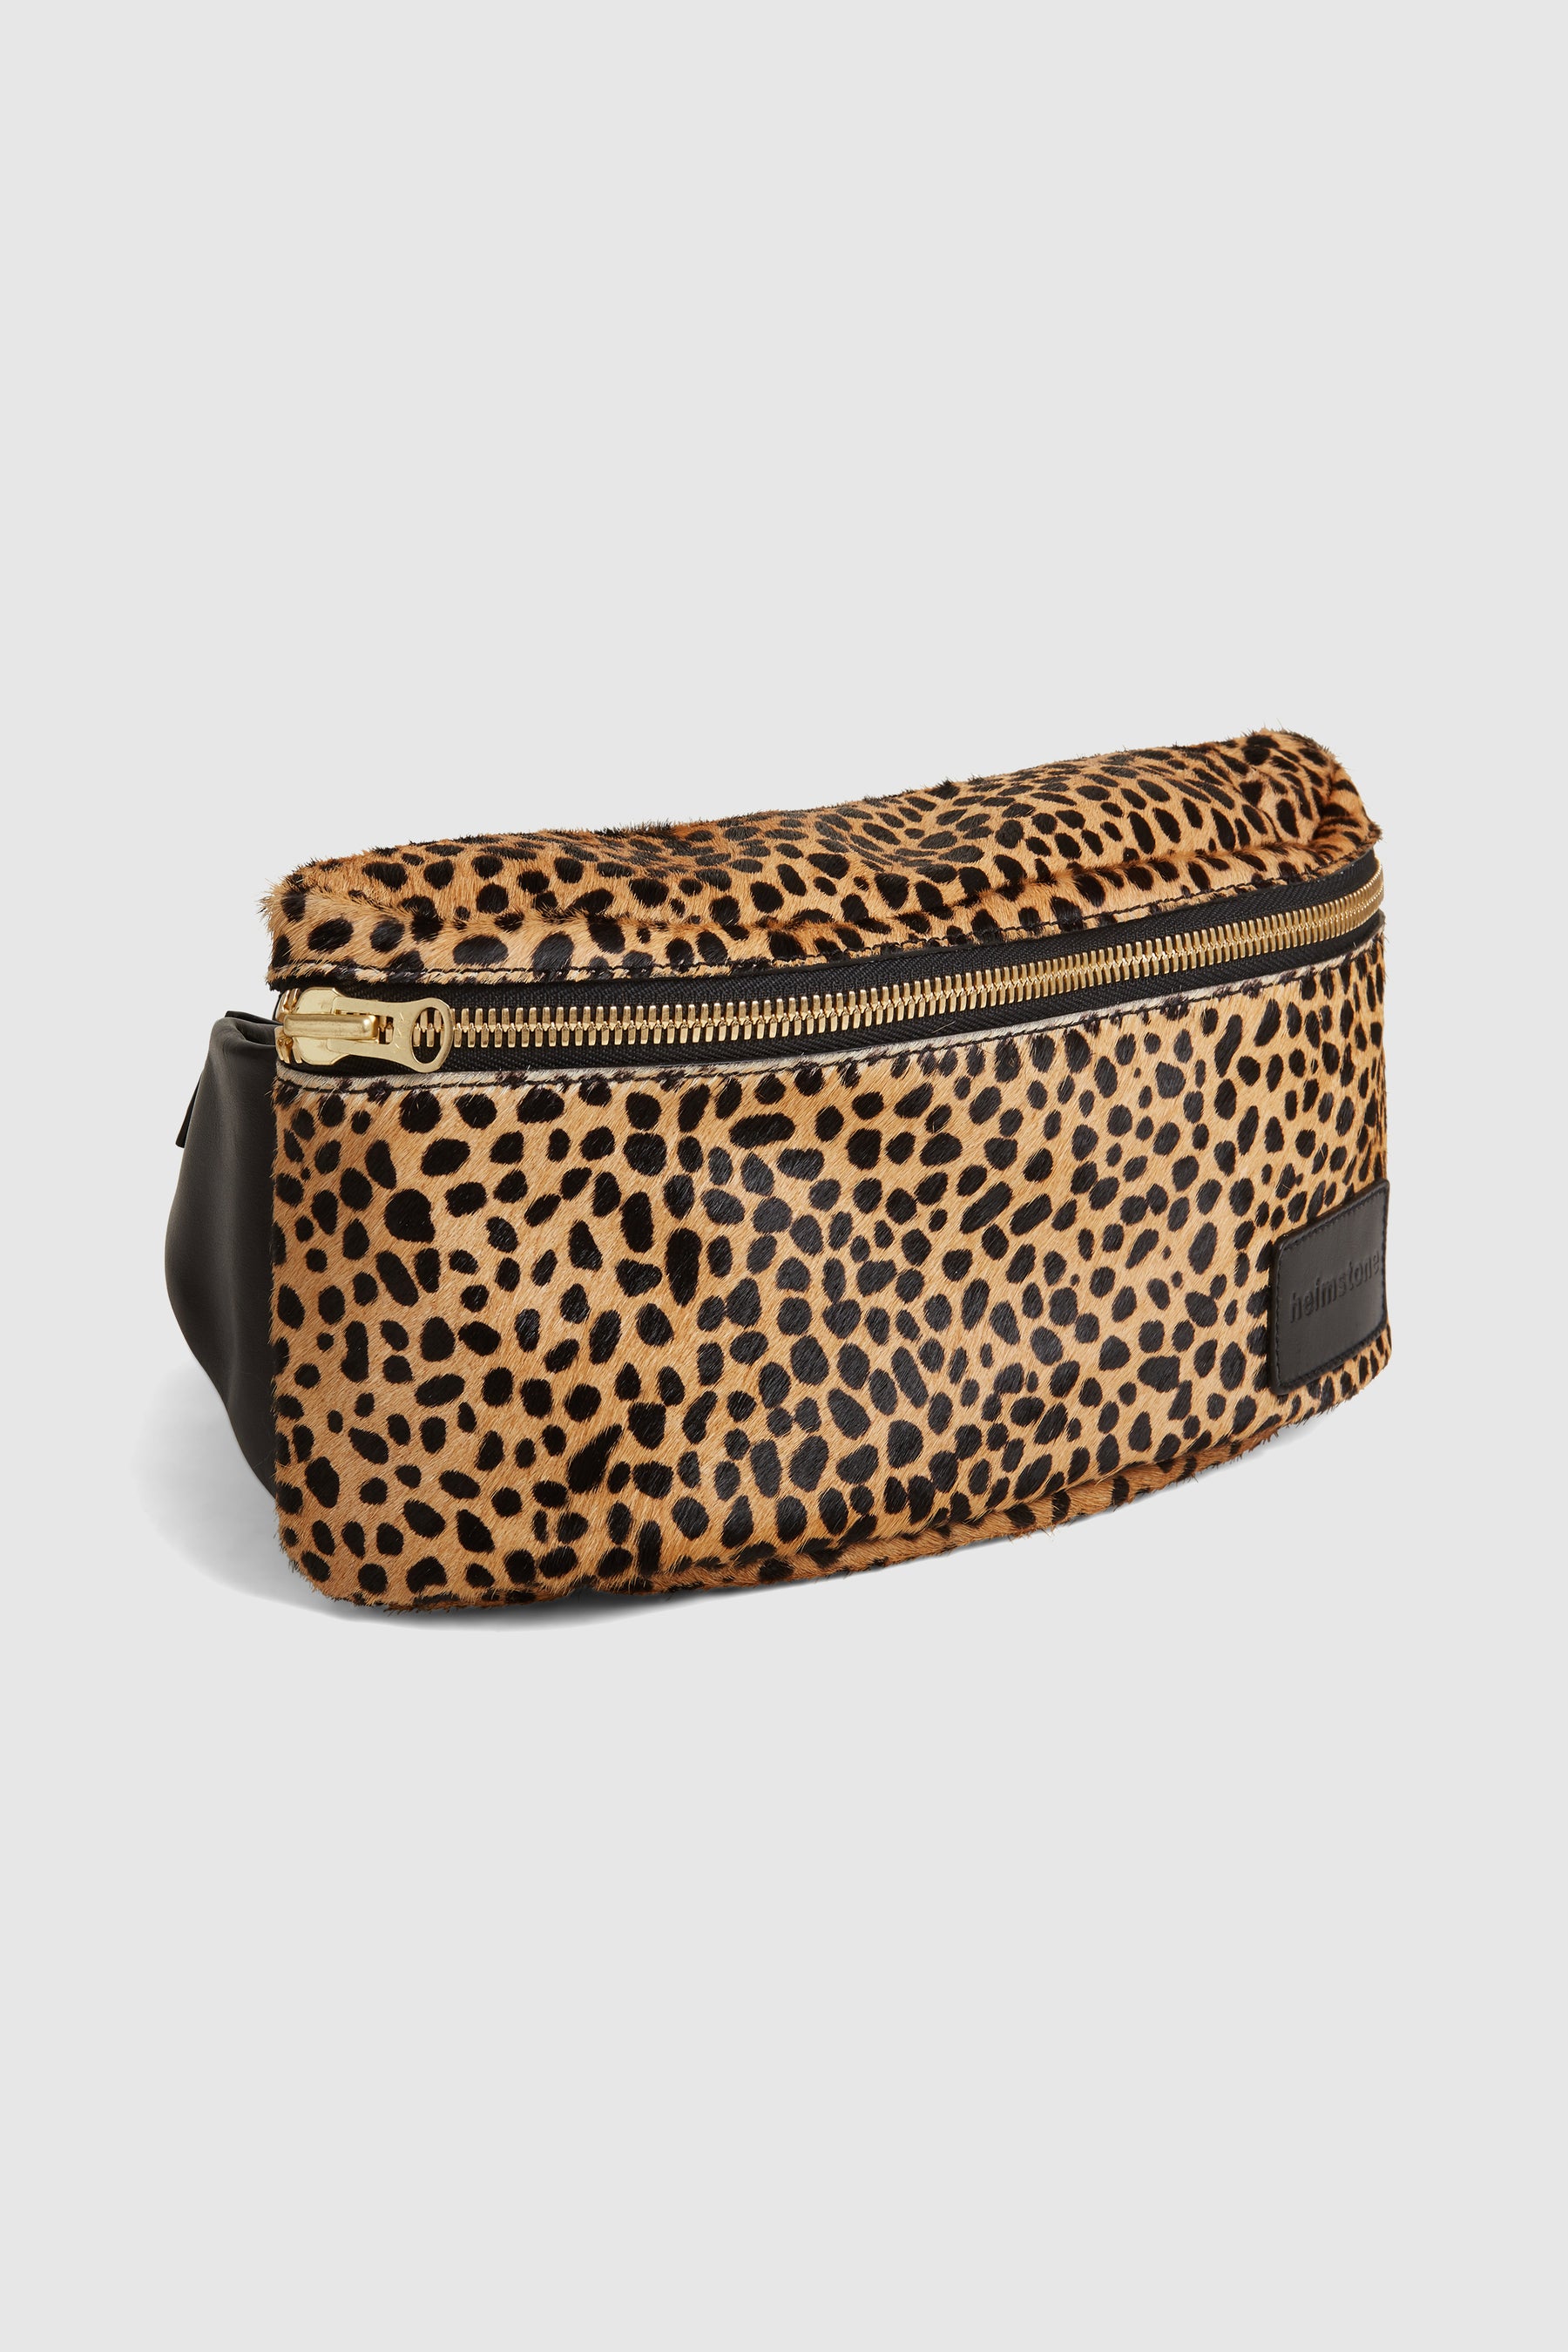 Fanny pack in cheetah printed leather